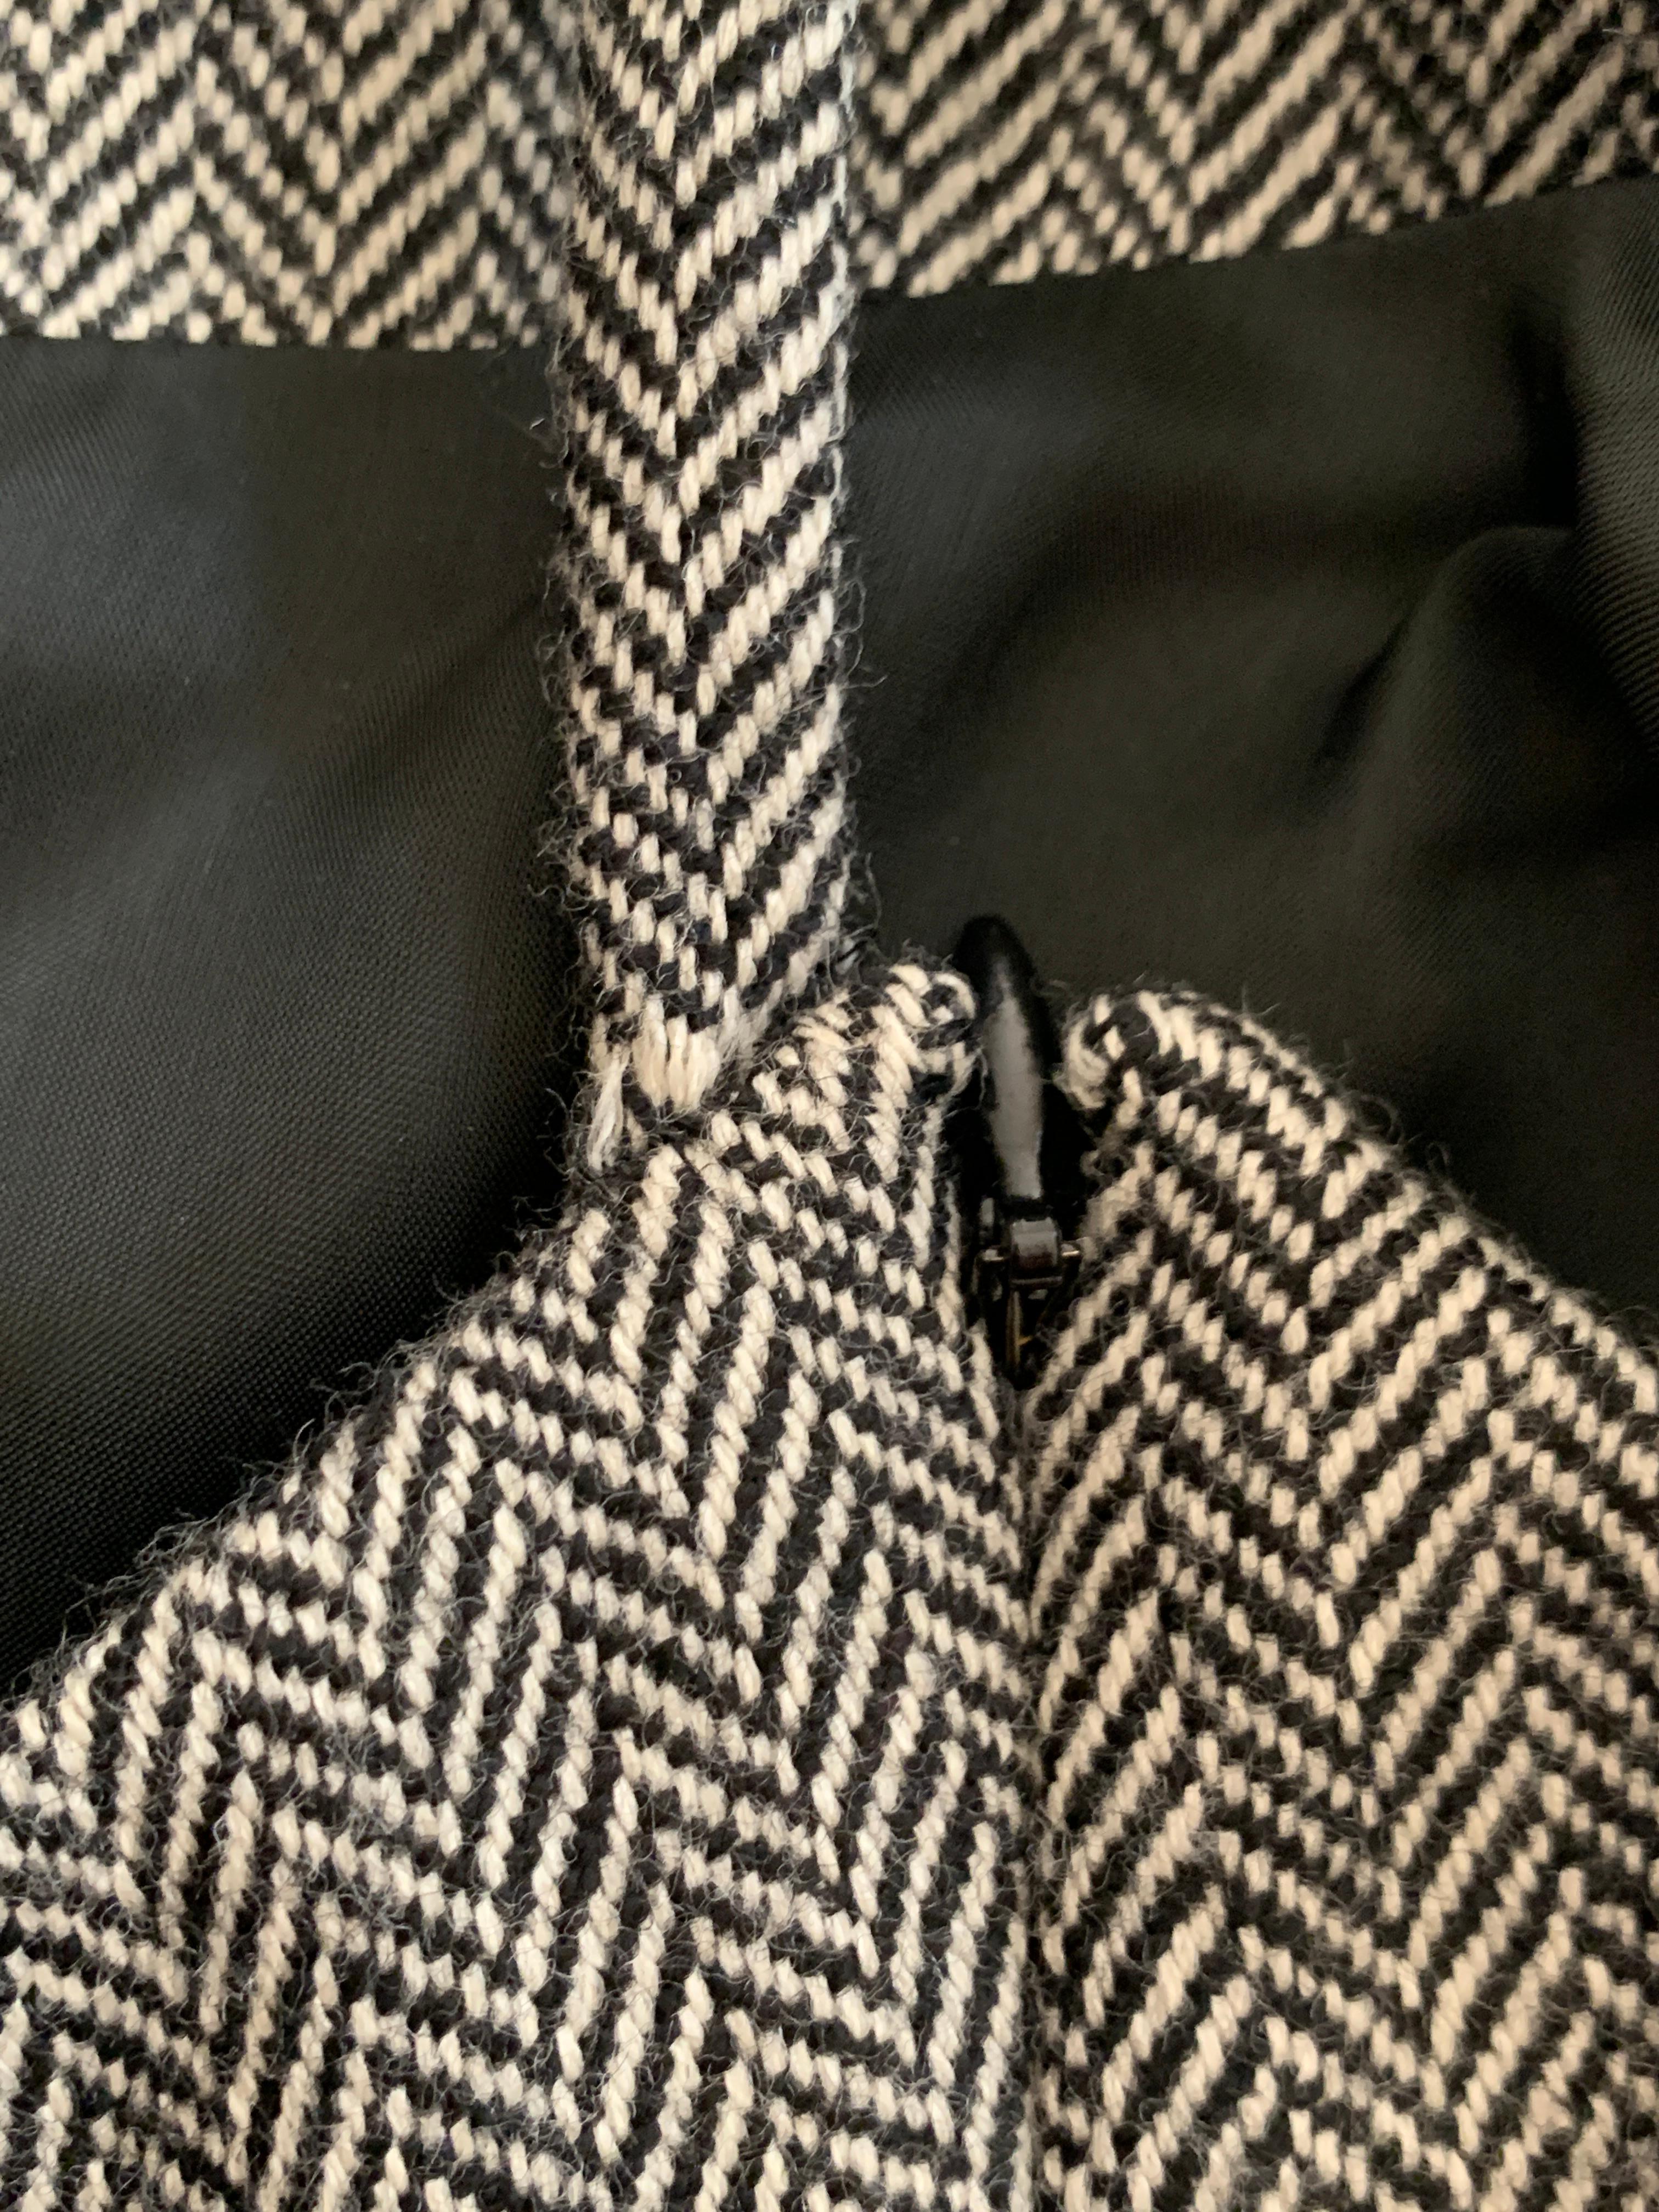 1990s Gianni Versace Couture Black and White Tweed Dress with Blue Lace Trim For Sale 2